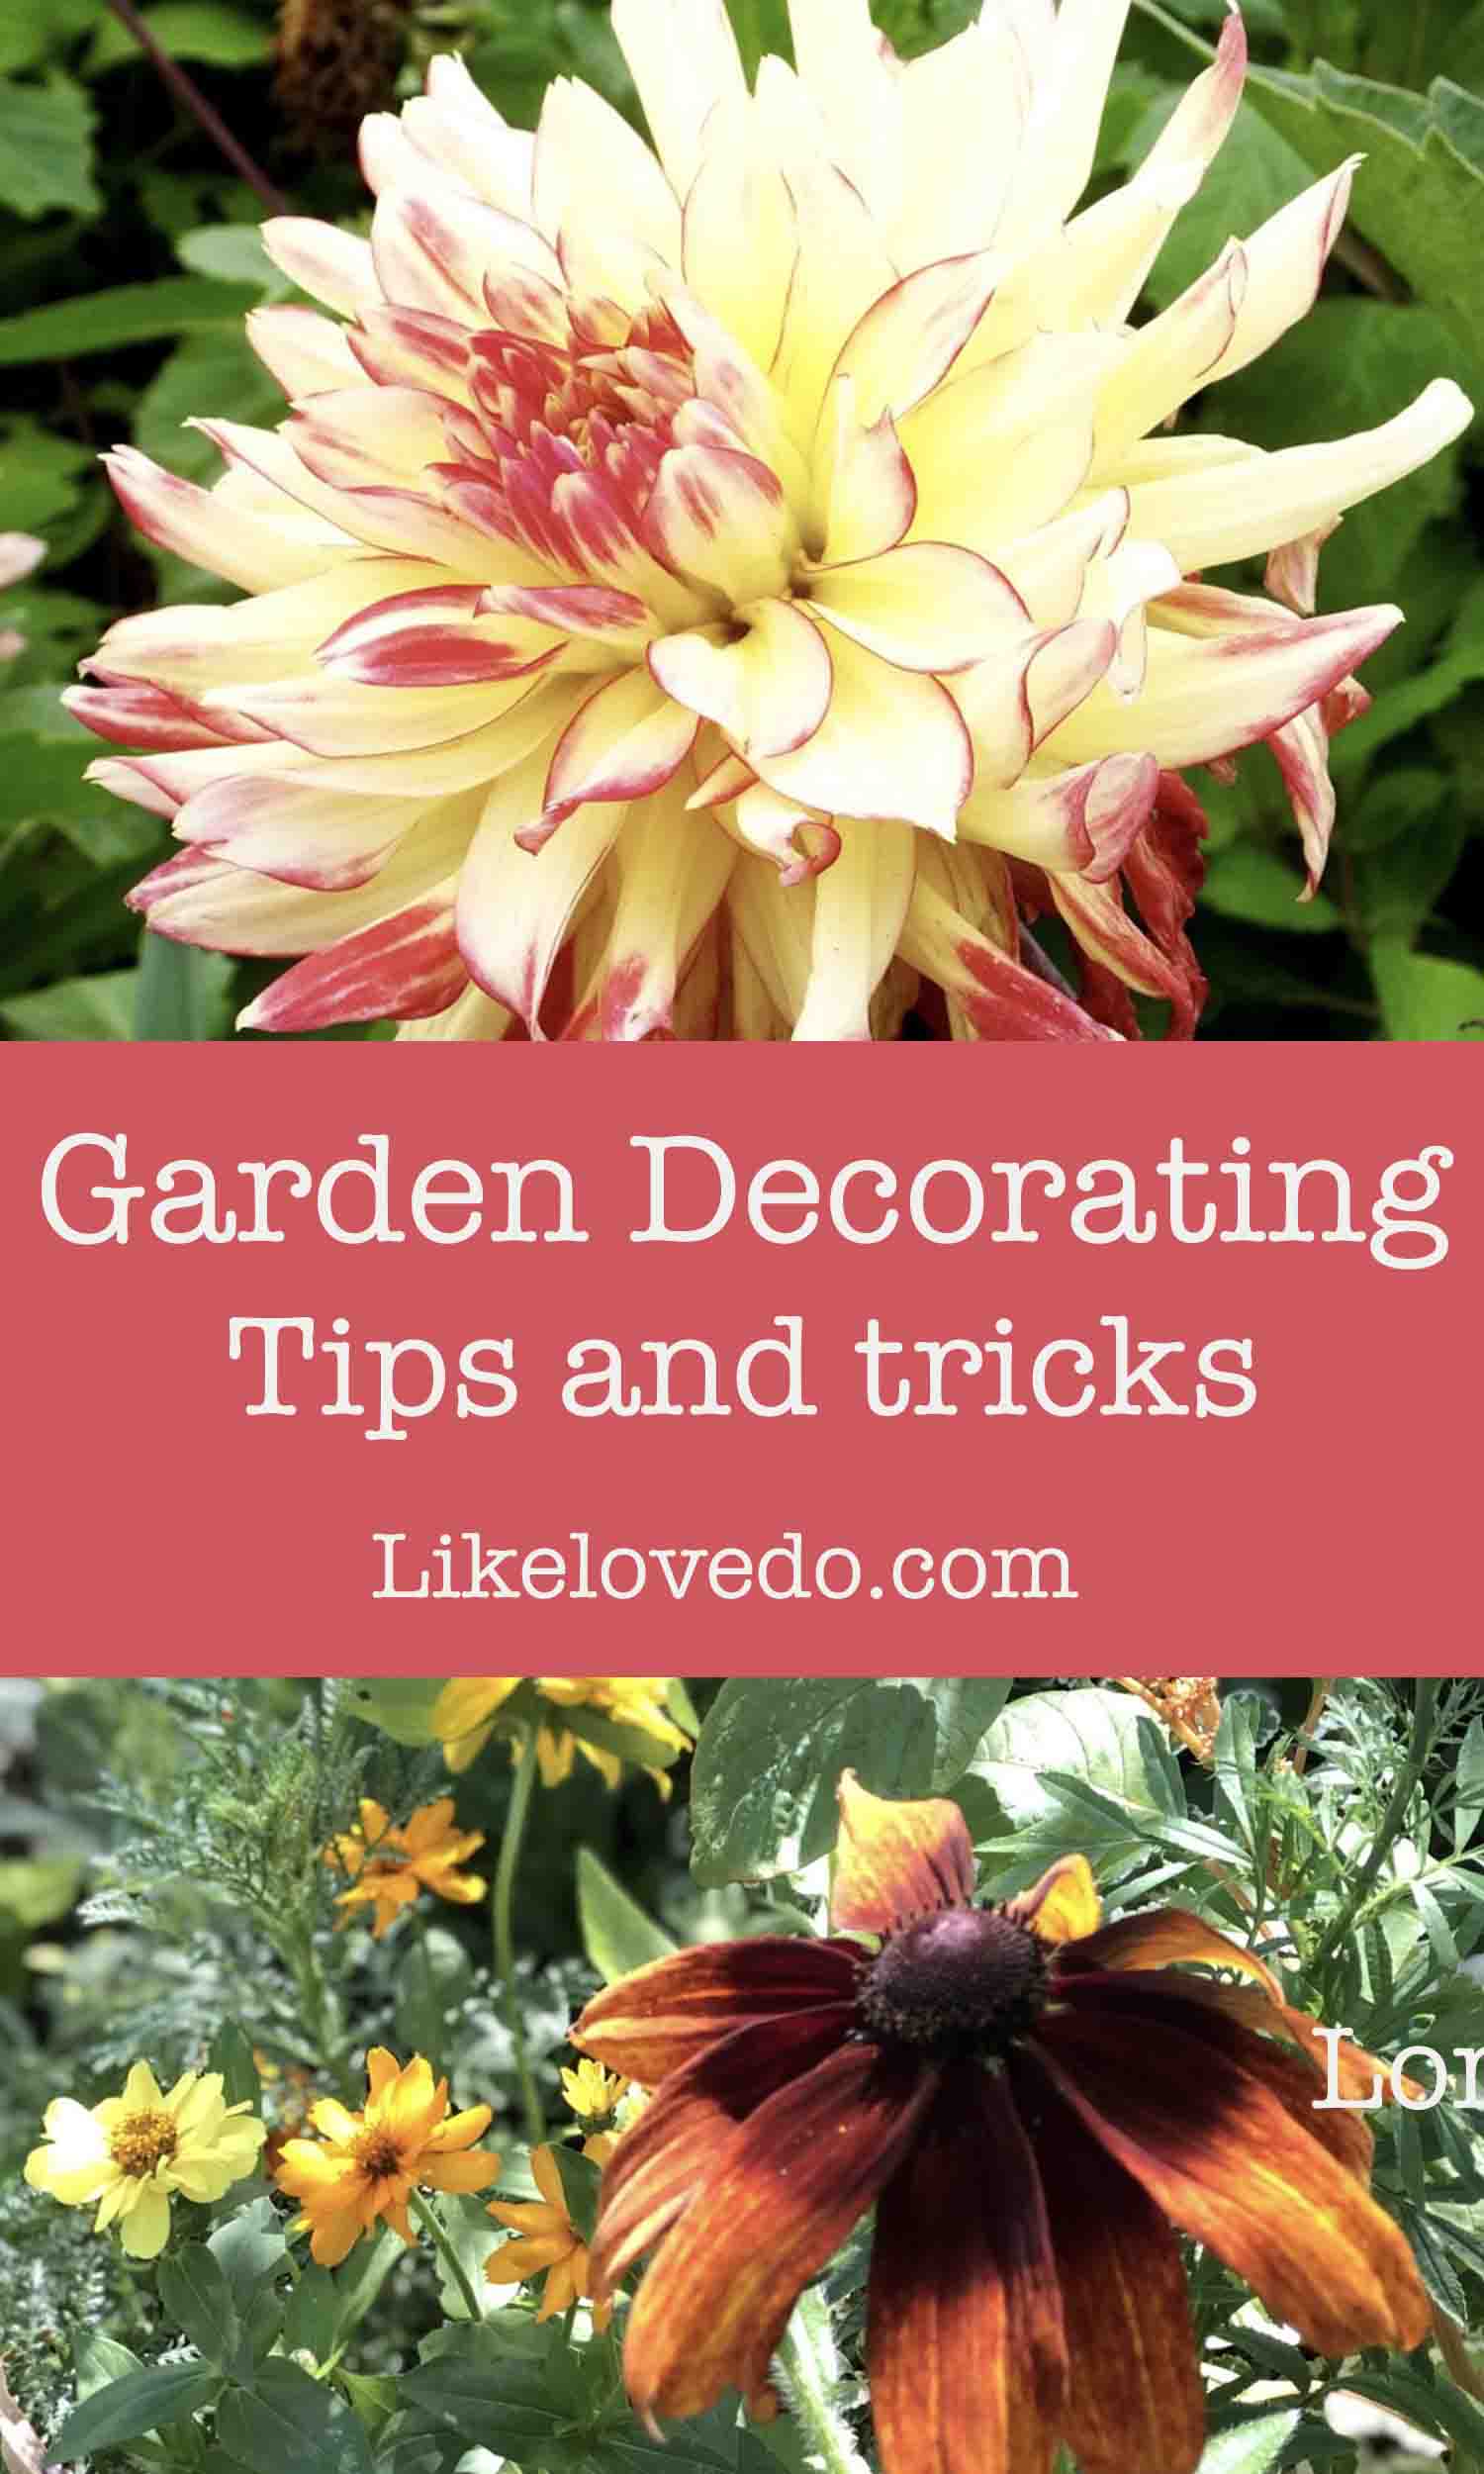 Tips for Decorating Your Garden